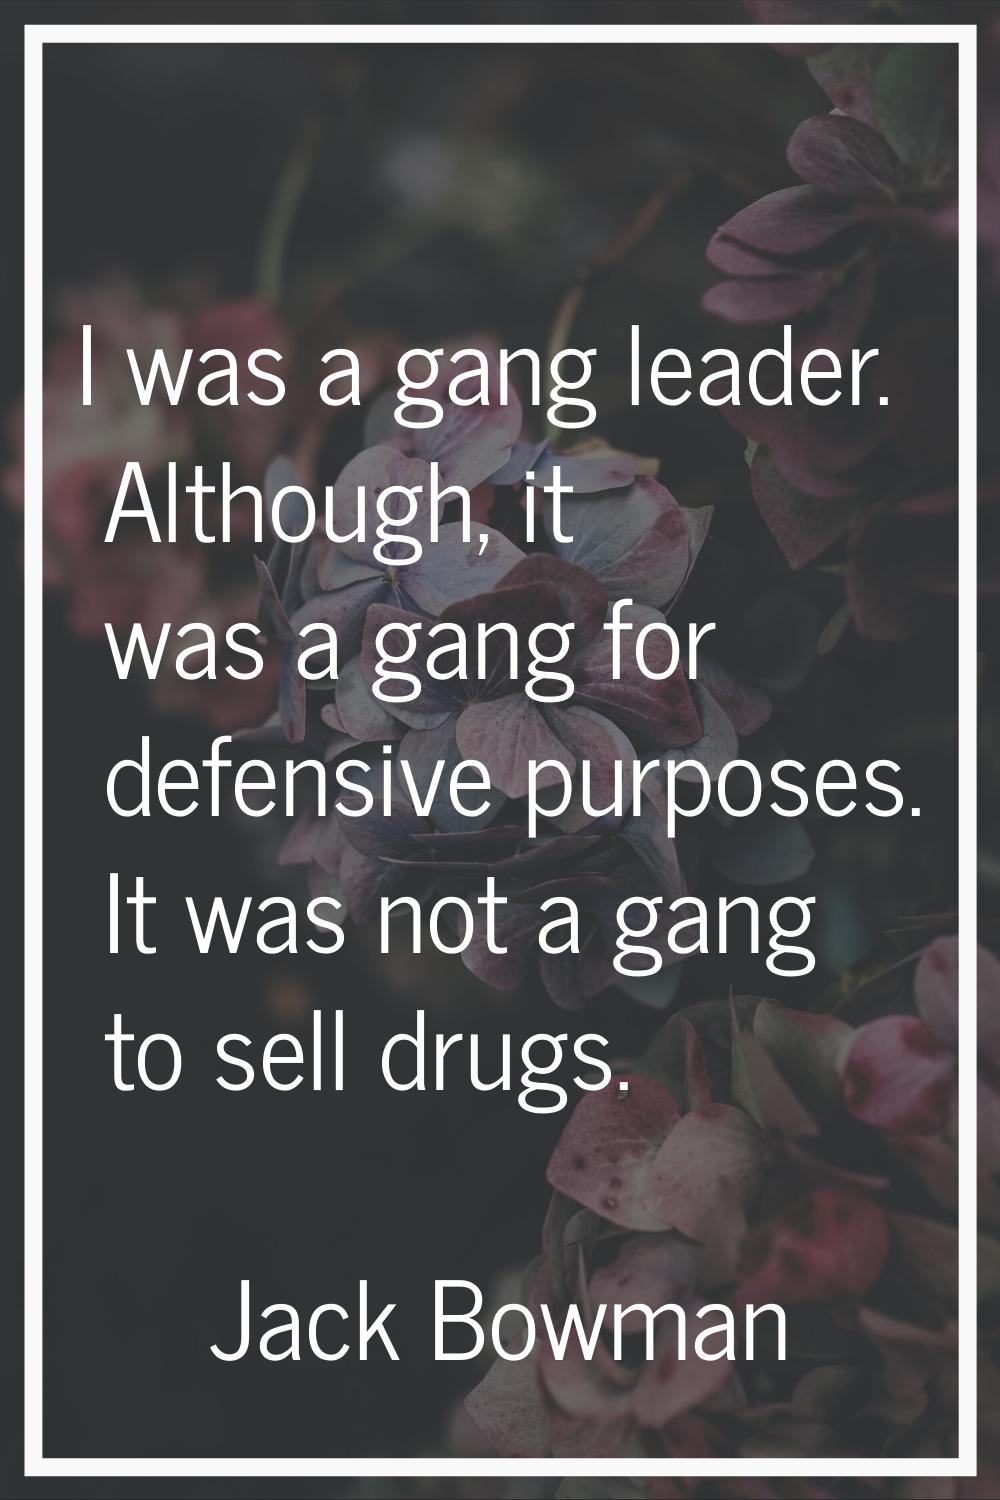 I was a gang leader. Although, it was a gang for defensive purposes. It was not a gang to sell drug